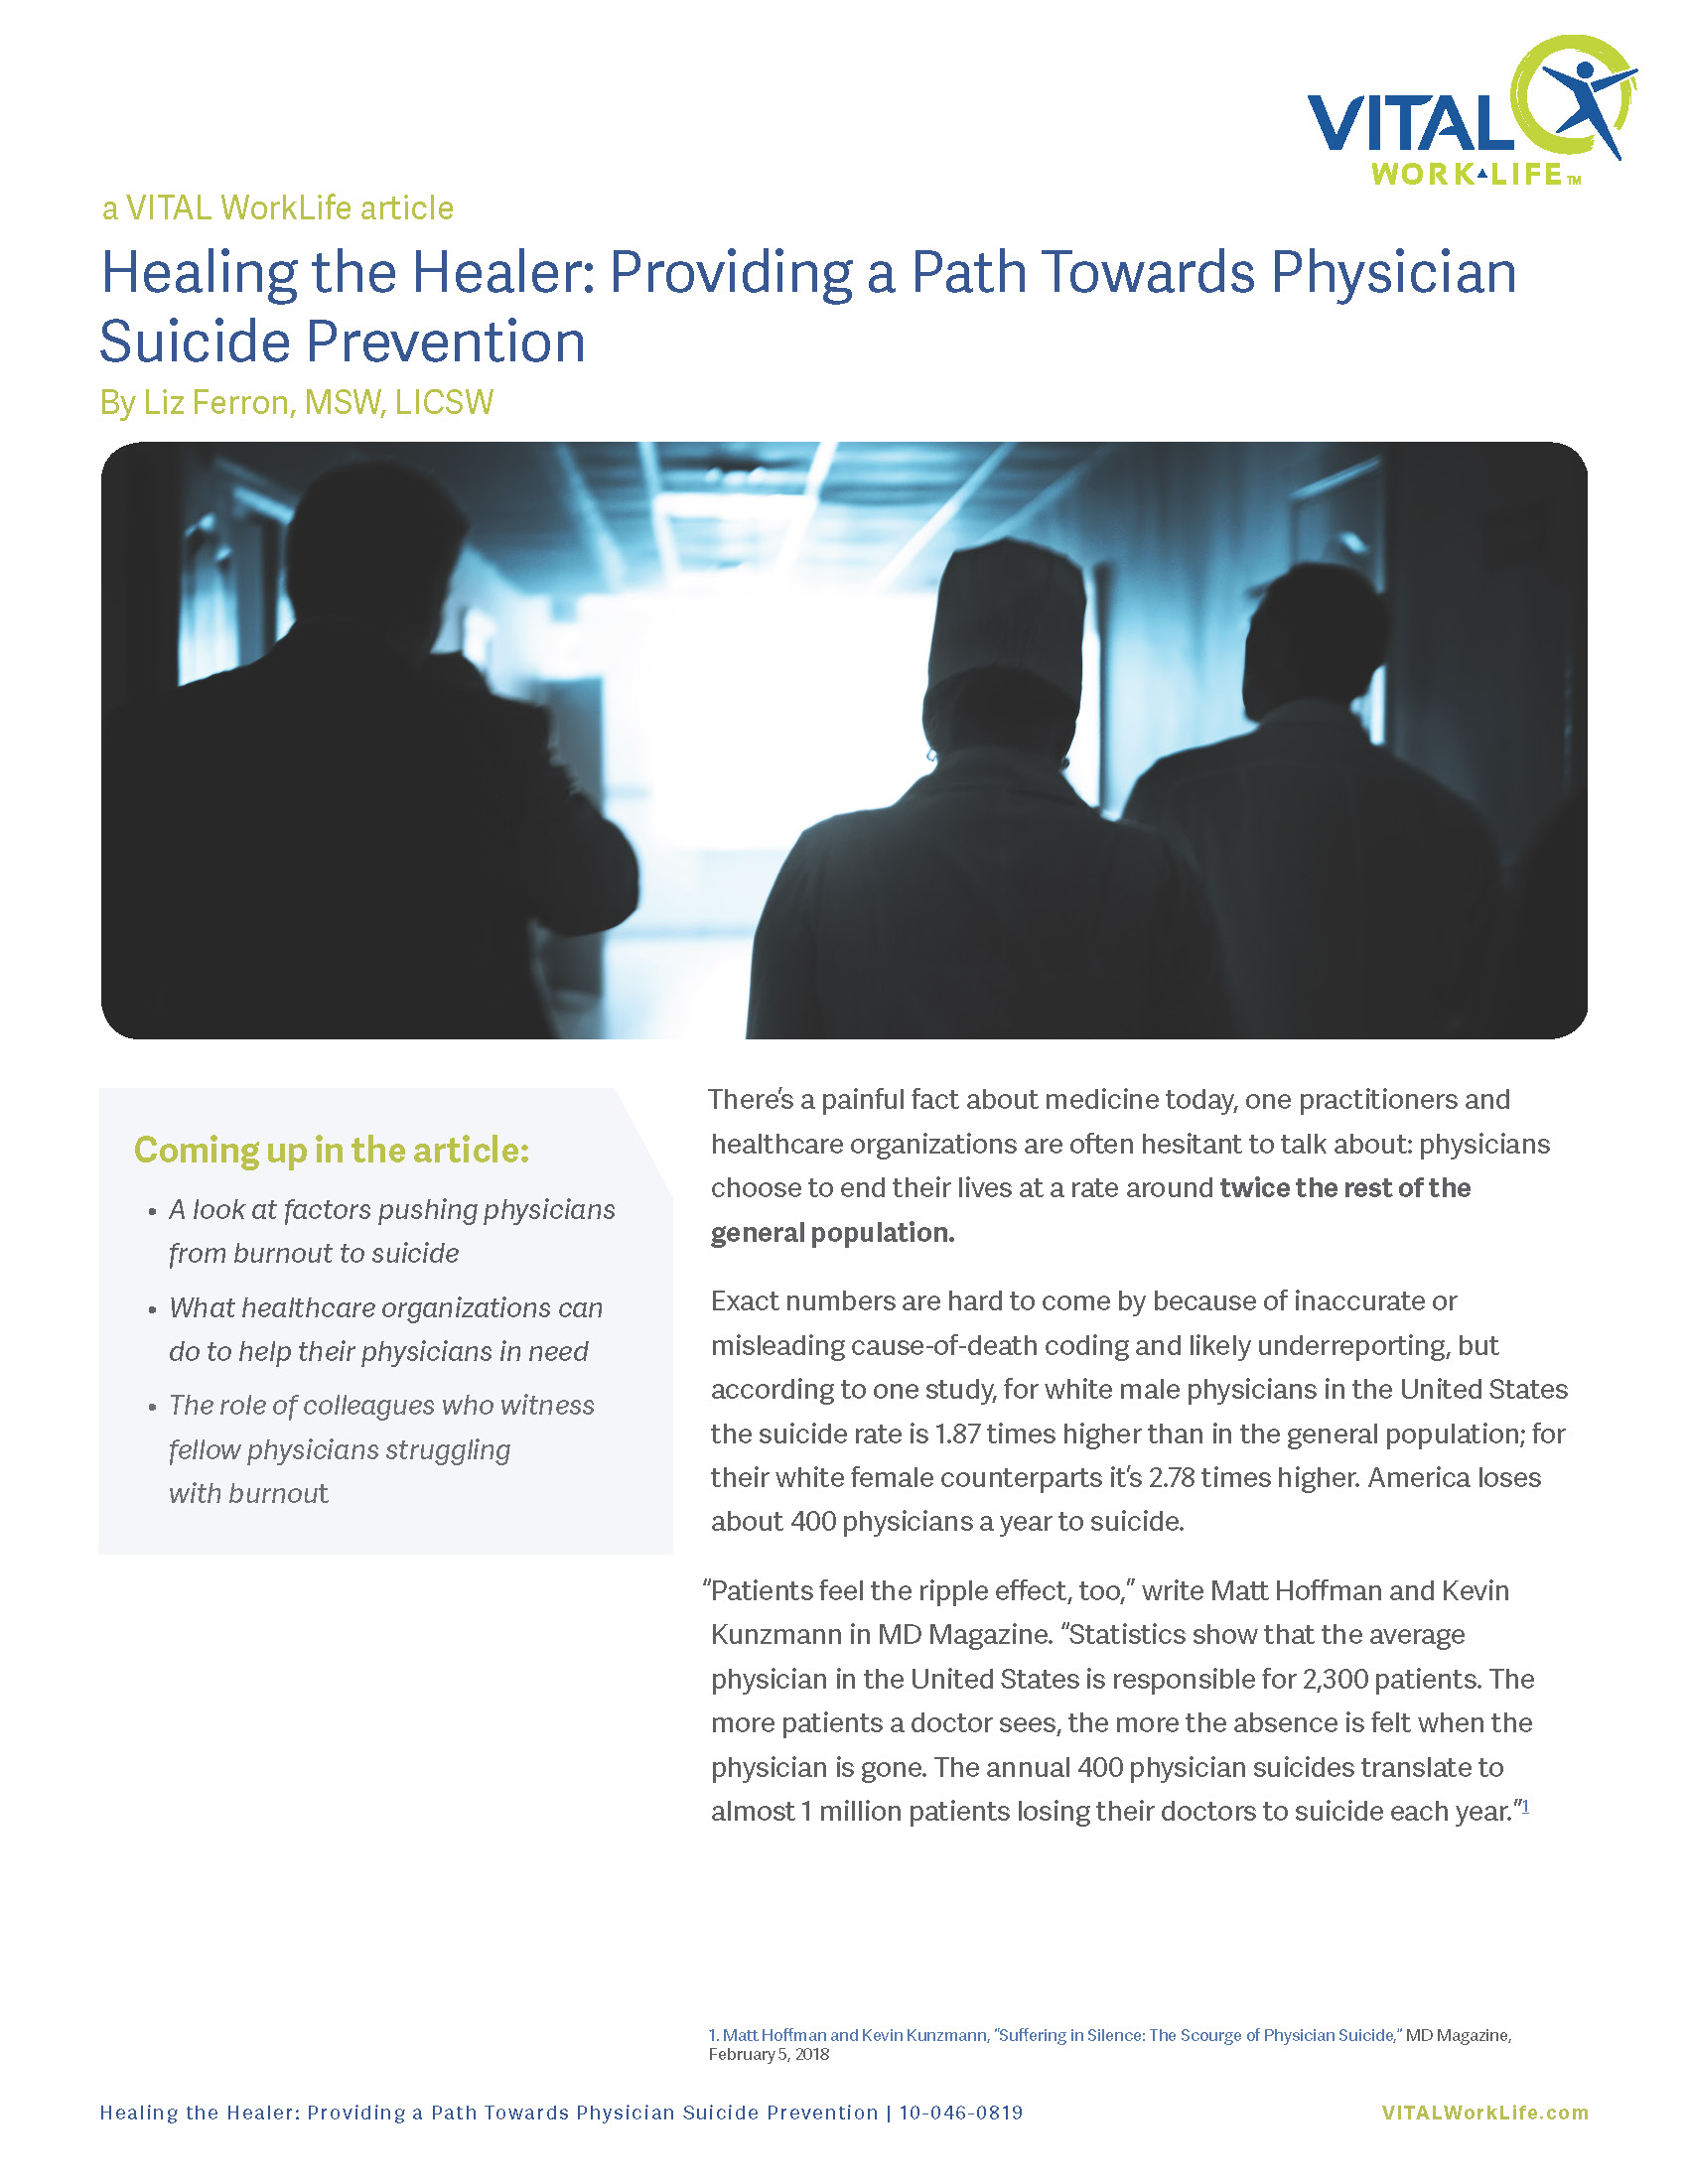 Article-Healing the Healer-Providing a Path Towards Physician Suicide Prevention